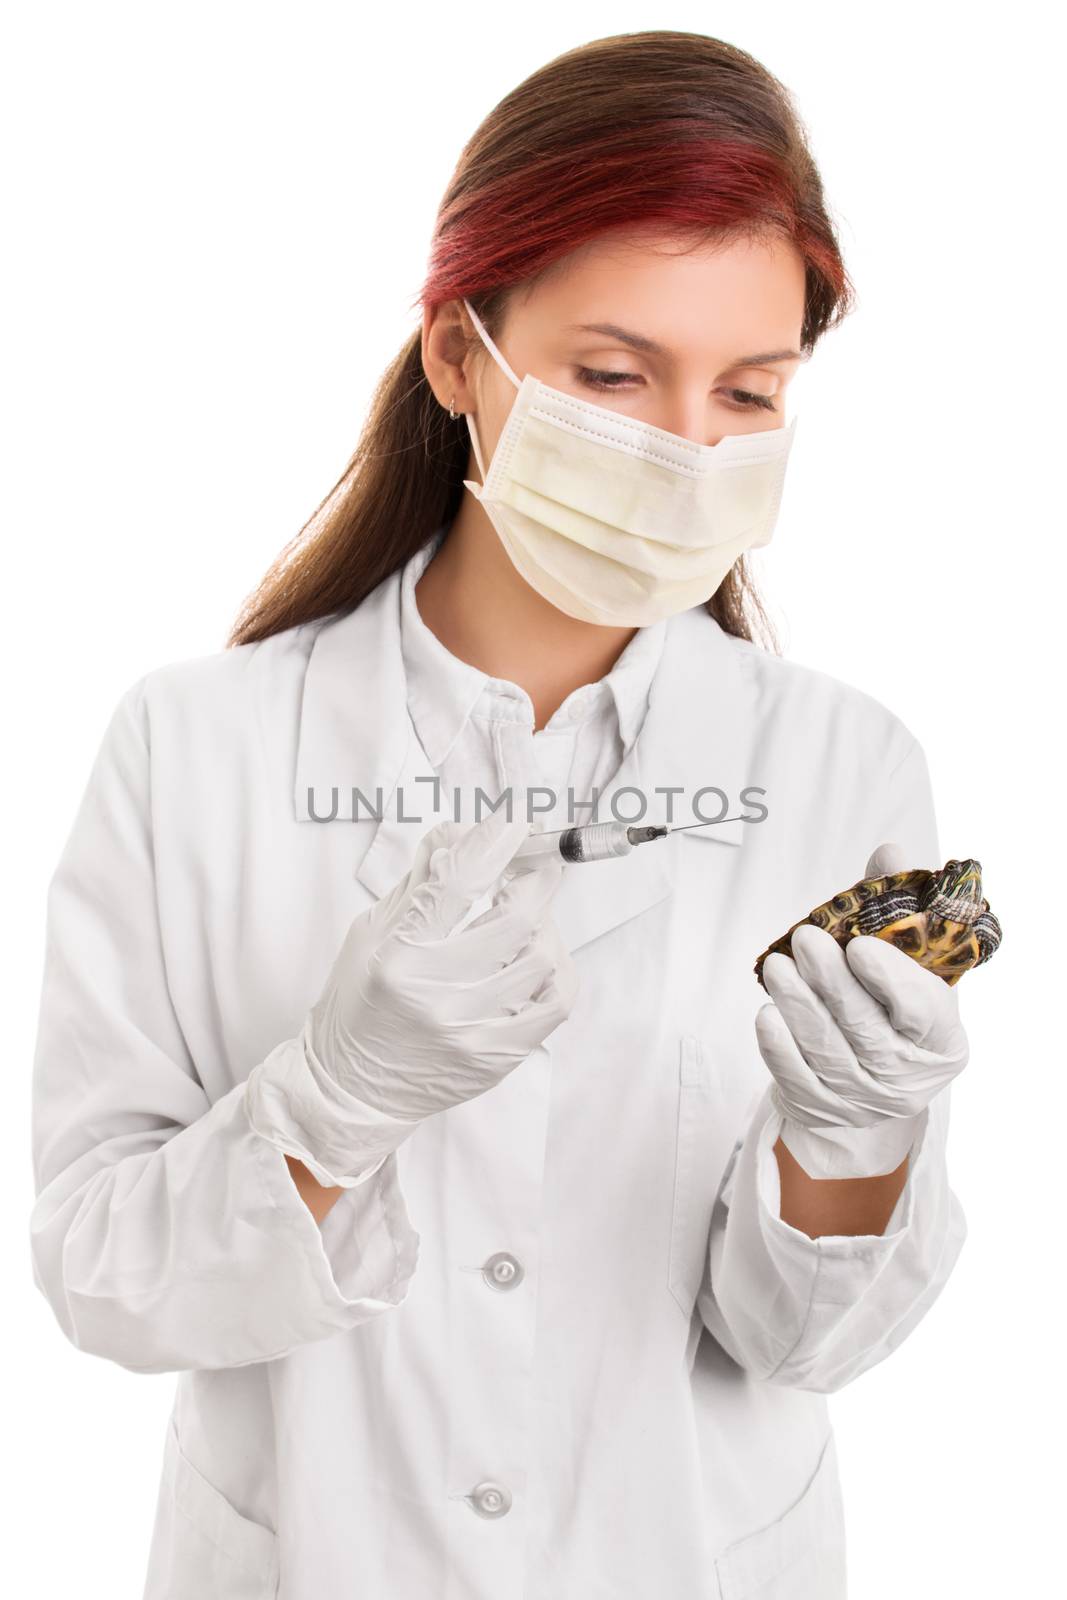 Taking care of the animals. Young female veterinarian in lab coat, surgical mask and syringe with needle holding a pet turtle, isolated on white background.